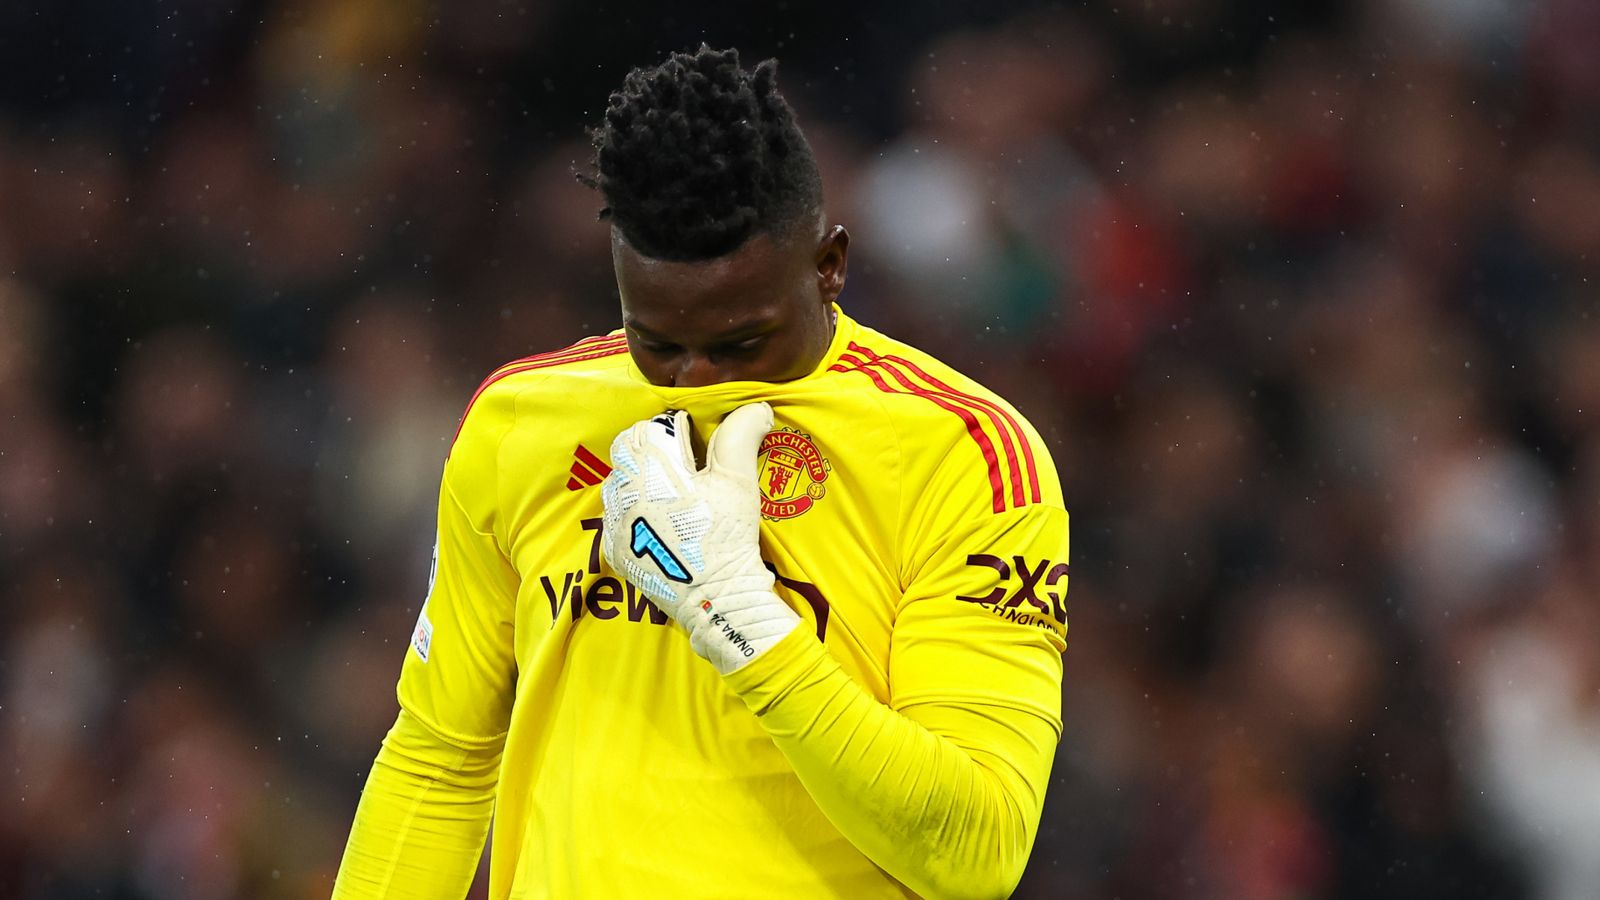 UEFA Champions League: Man Utd suffer stunning defeat at home to Galatasaray